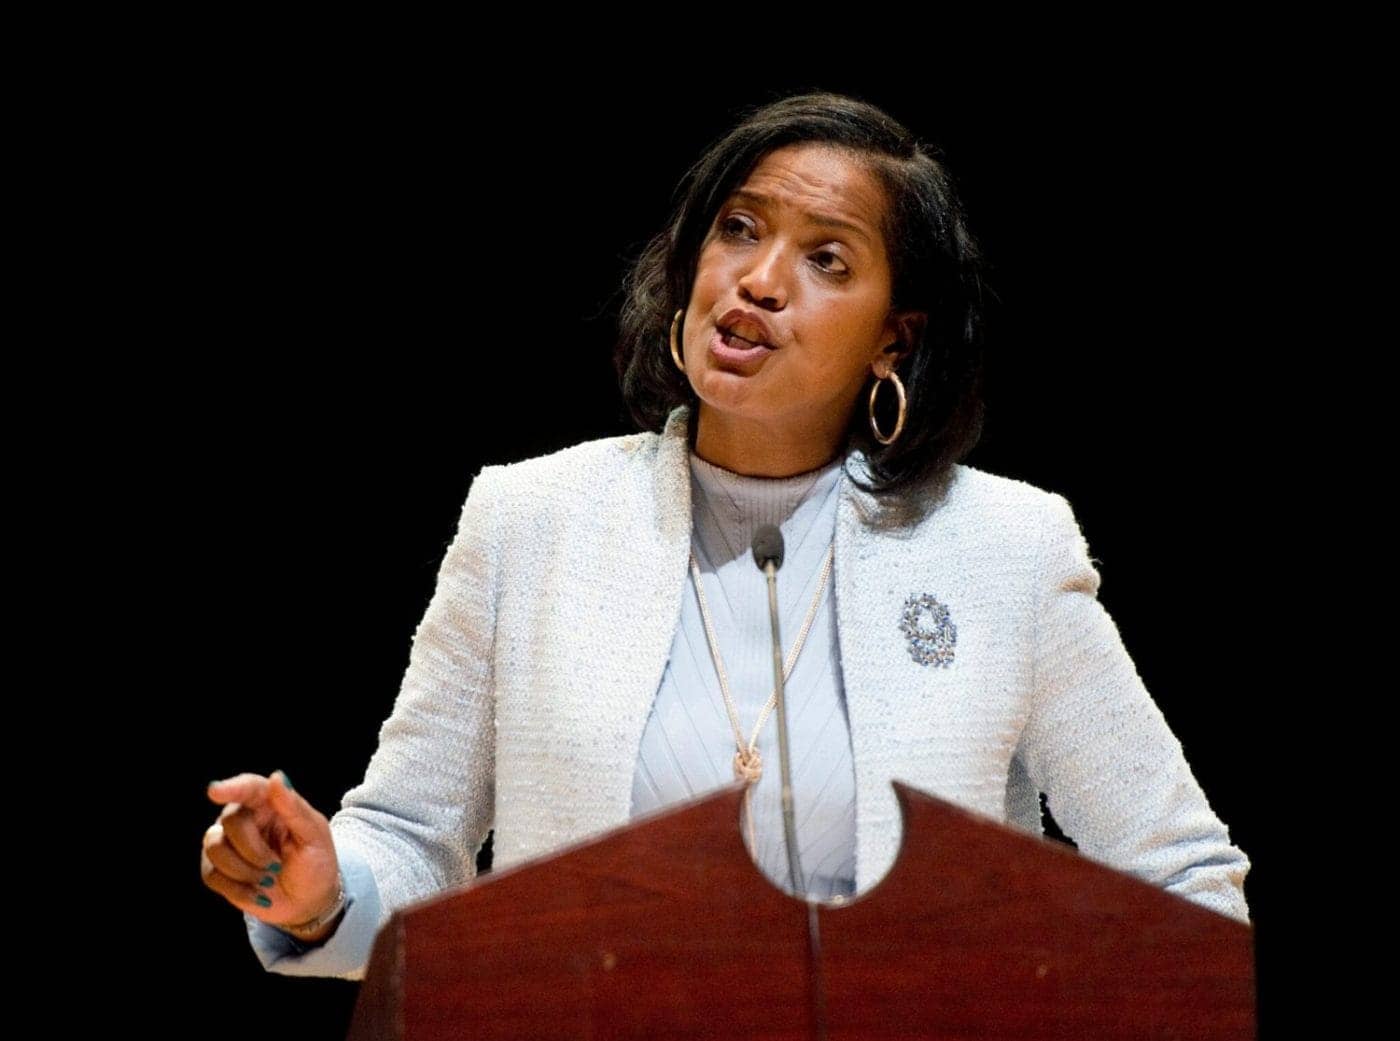 Rep.-Jahana-Hayes-D-Conn.-zoombombed-during-town-hall-101220-by-Jim-Shannon-AP-1400x1041, Who’s zoomin’ who? Why Zooming is bad for Black people, Culture Currents 